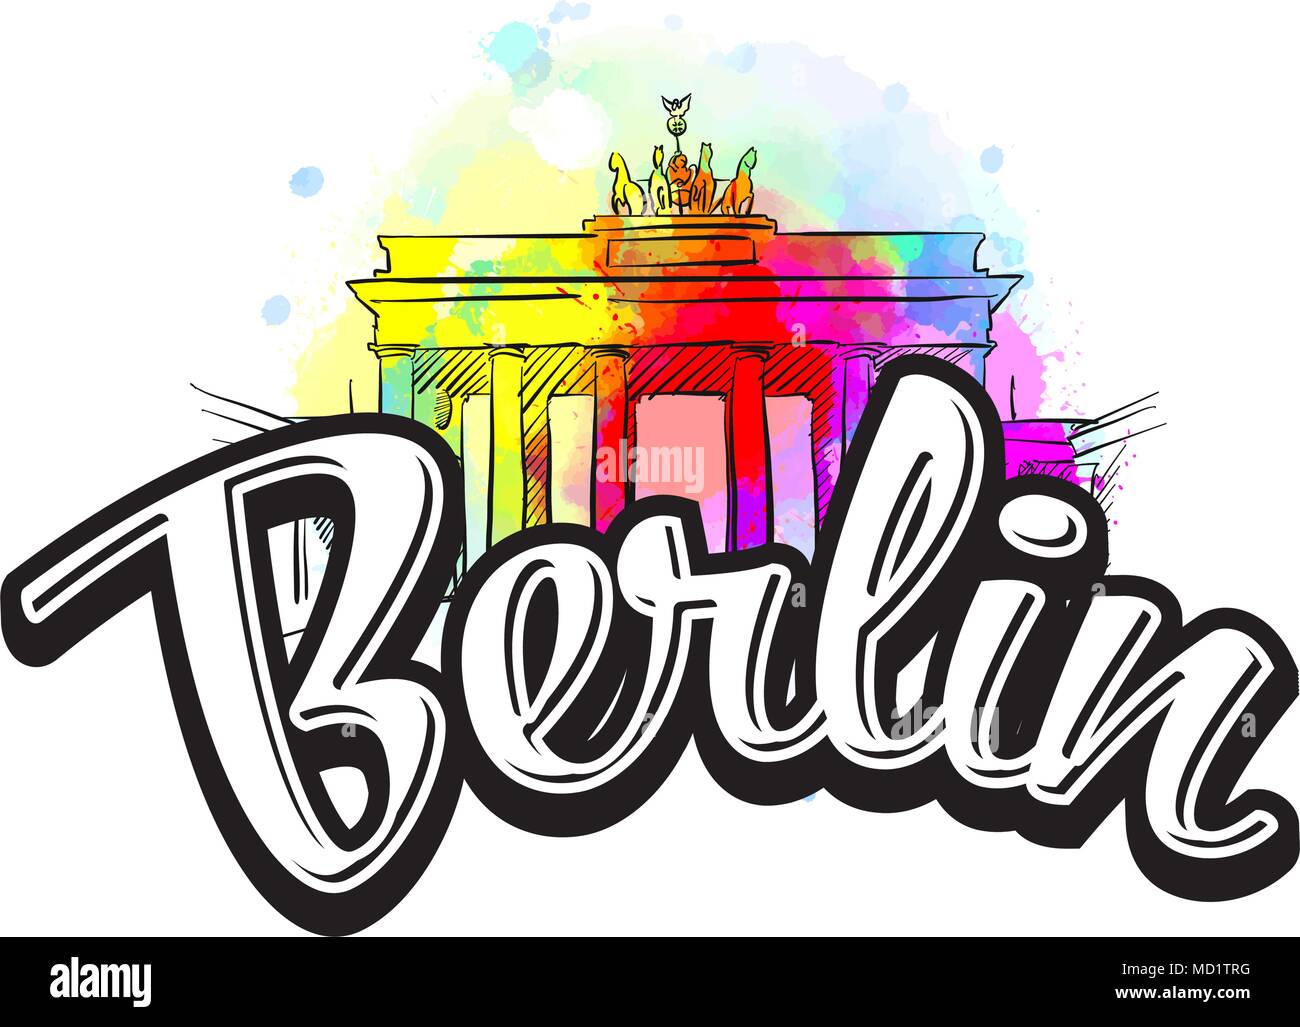 Berlin Brandenburg Gate Drawing with Headline. Hand drawn illustration. Vector image for digital marketing and poster prints. Stock Vector